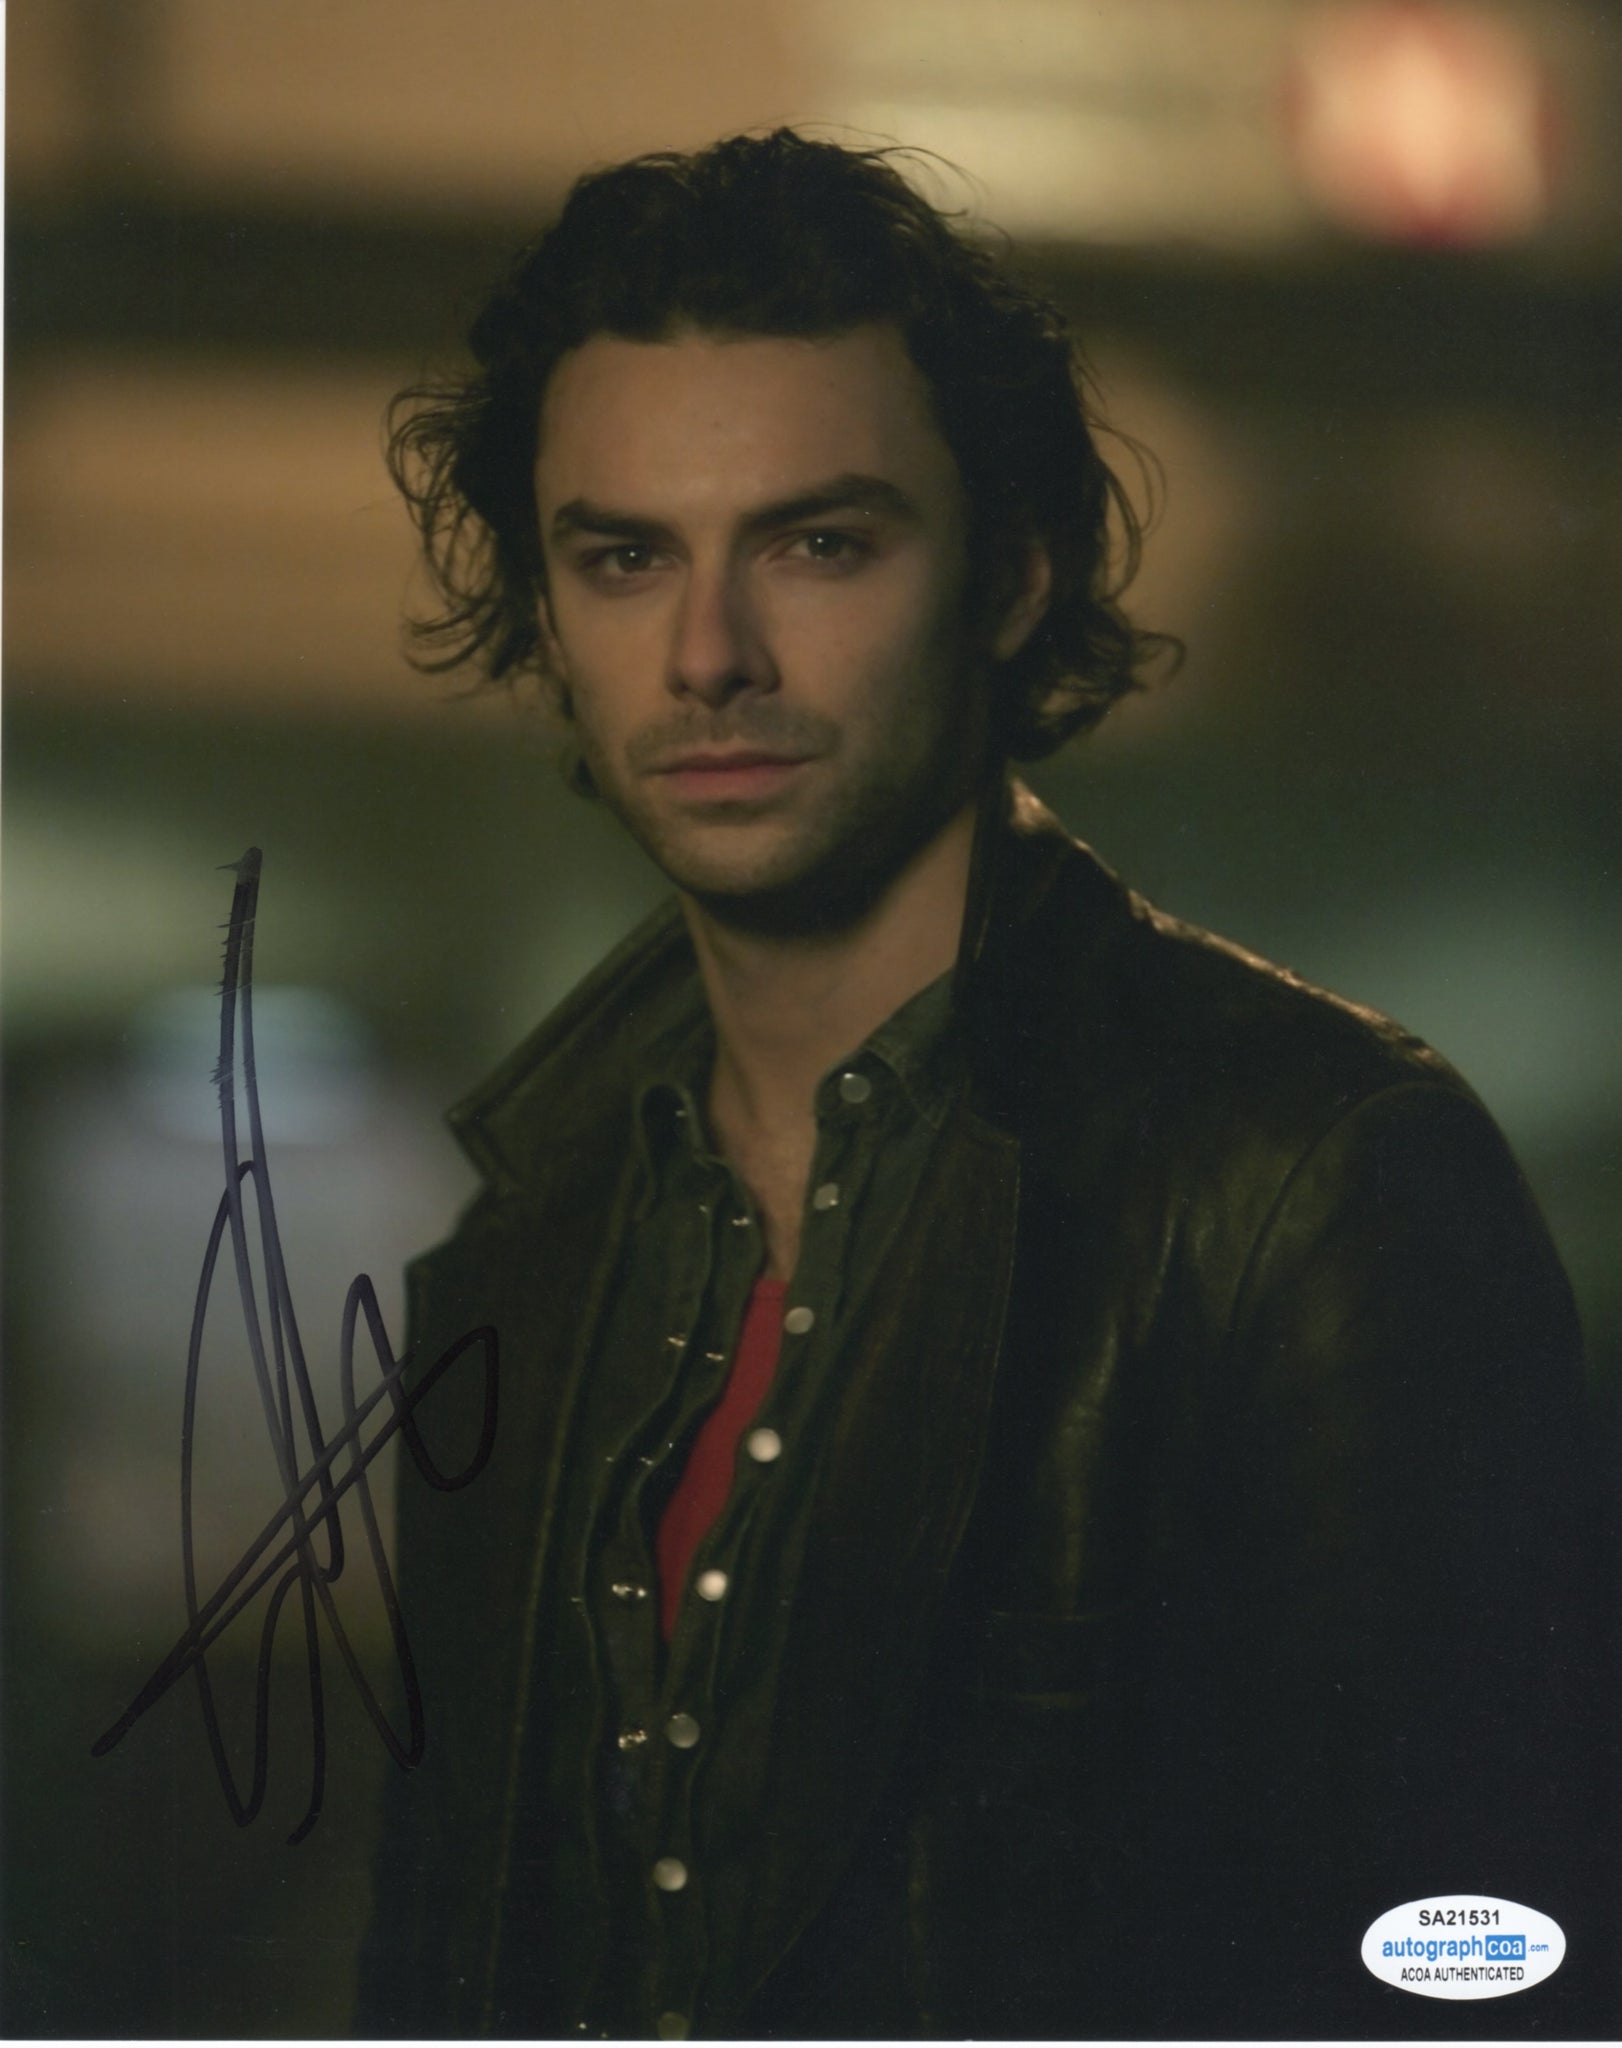 Aidan Turner Being Human Signed Autograph 8x10 Photo ACOA - Outlaw Hobbies Authentic Autographs